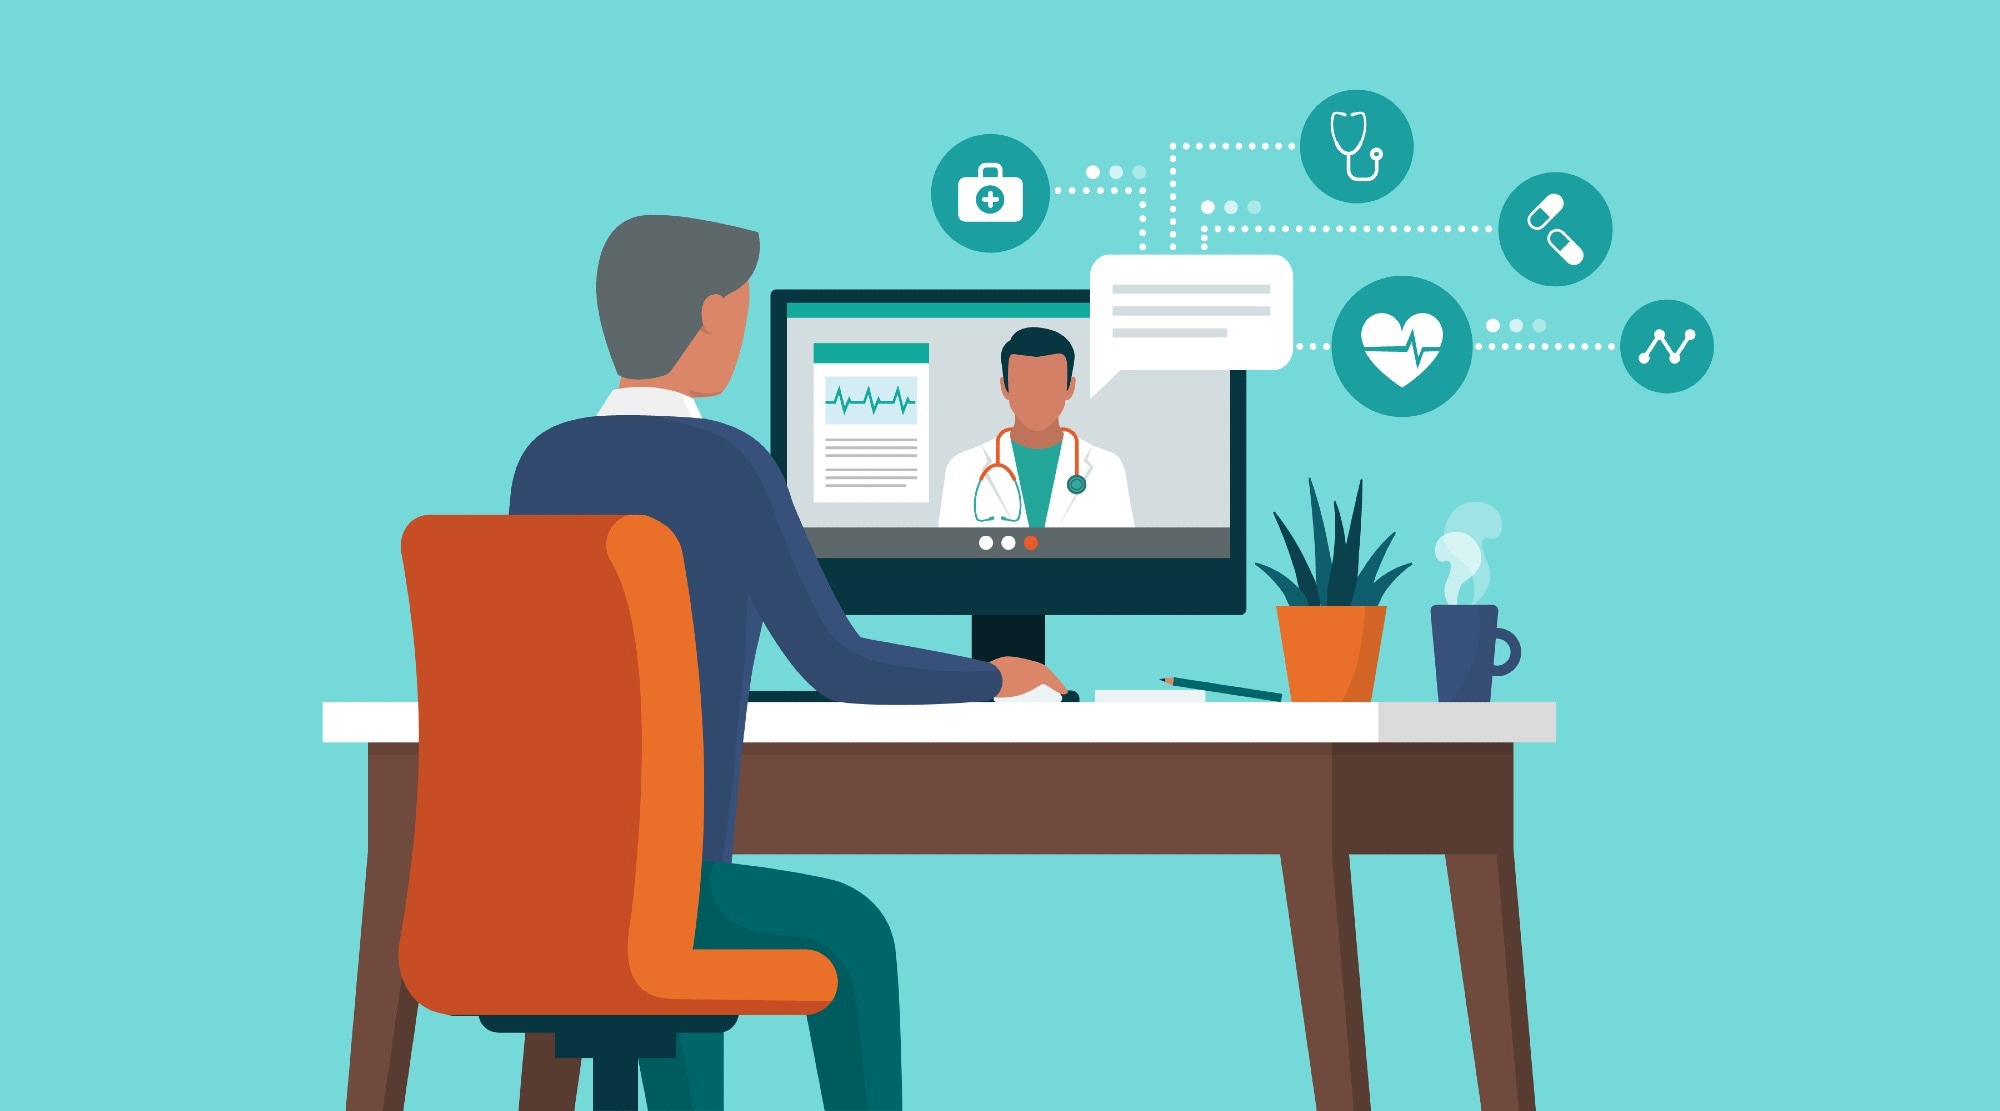 Study: Measuring Retention in HIV Care in the First Year of the COVID-19 Pandemic: The Impact of Telehealth. Image Credit: elenabsl/Shutterstock